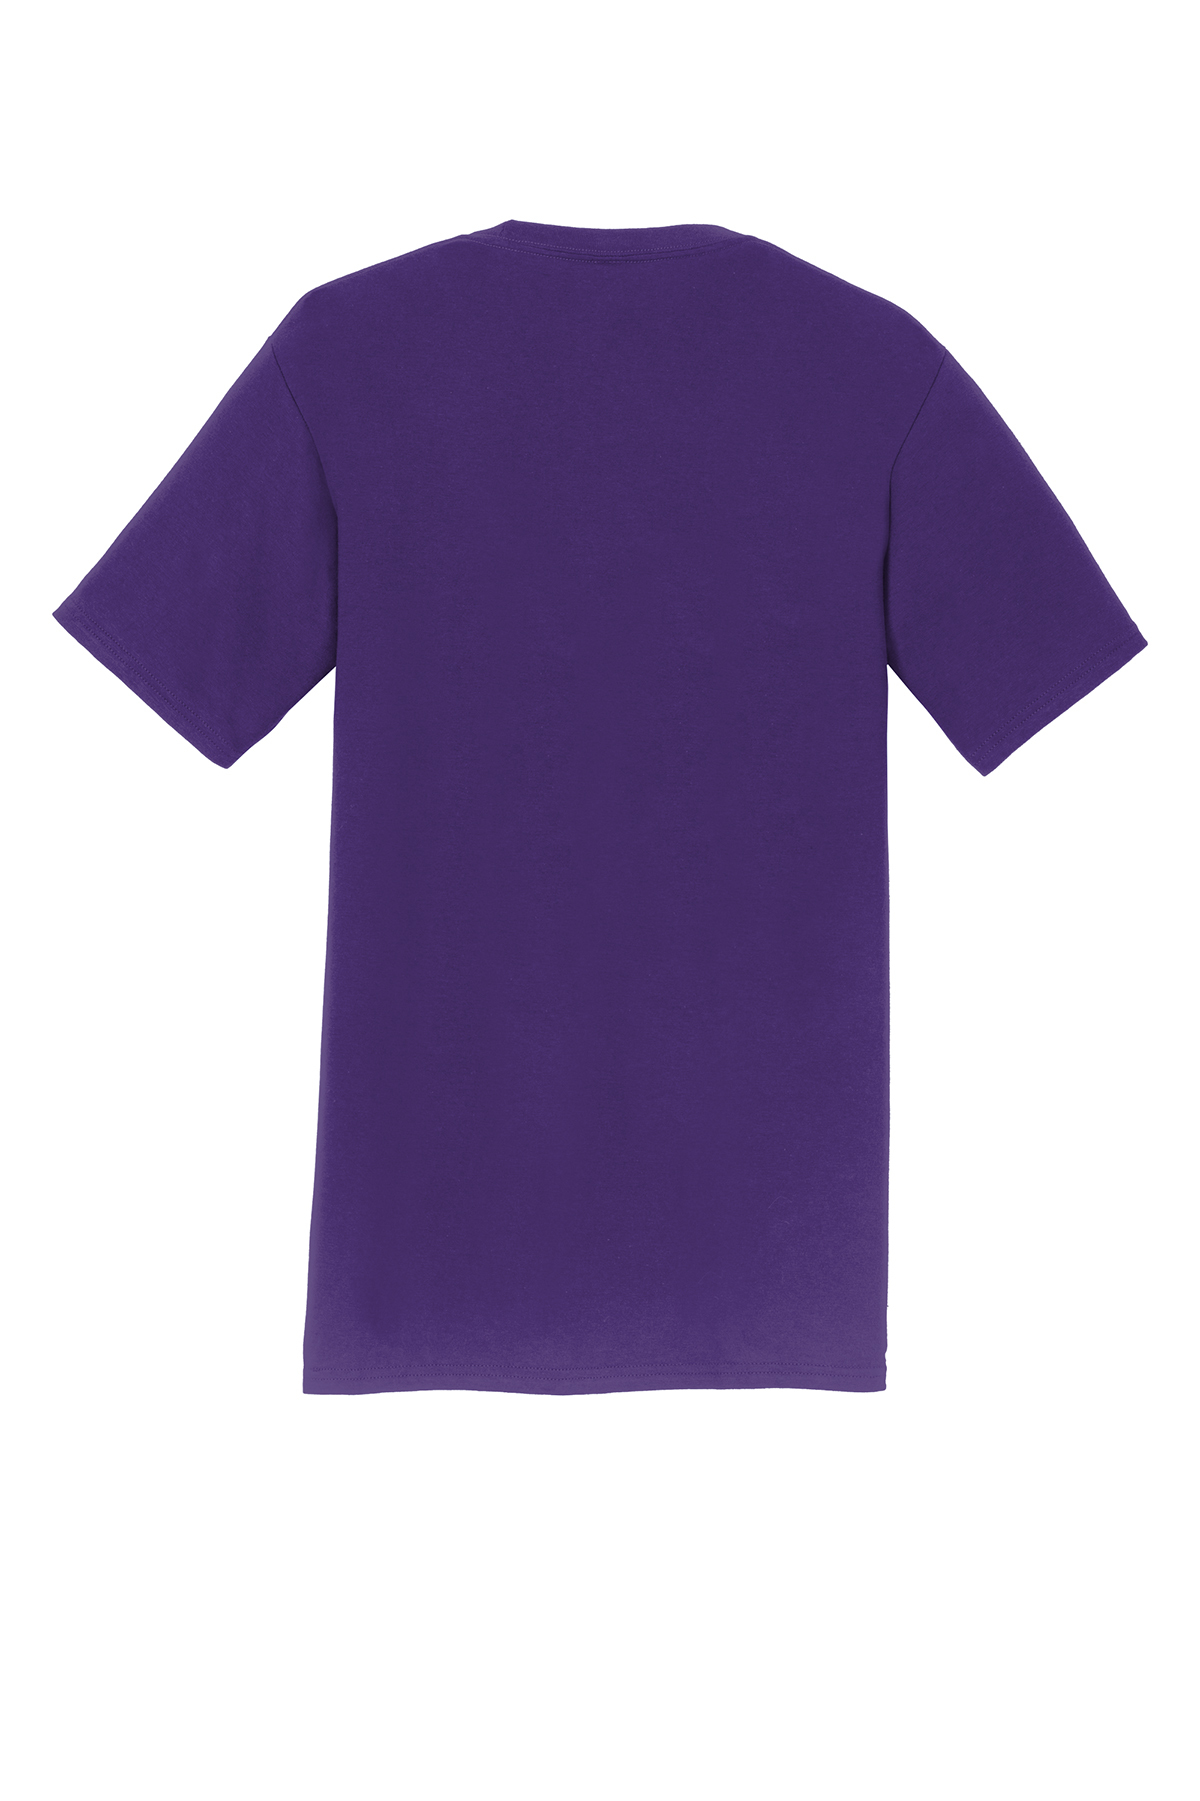 Port & Company<sup>®</SUP> Fan Favorite™ Tee | Product | Port